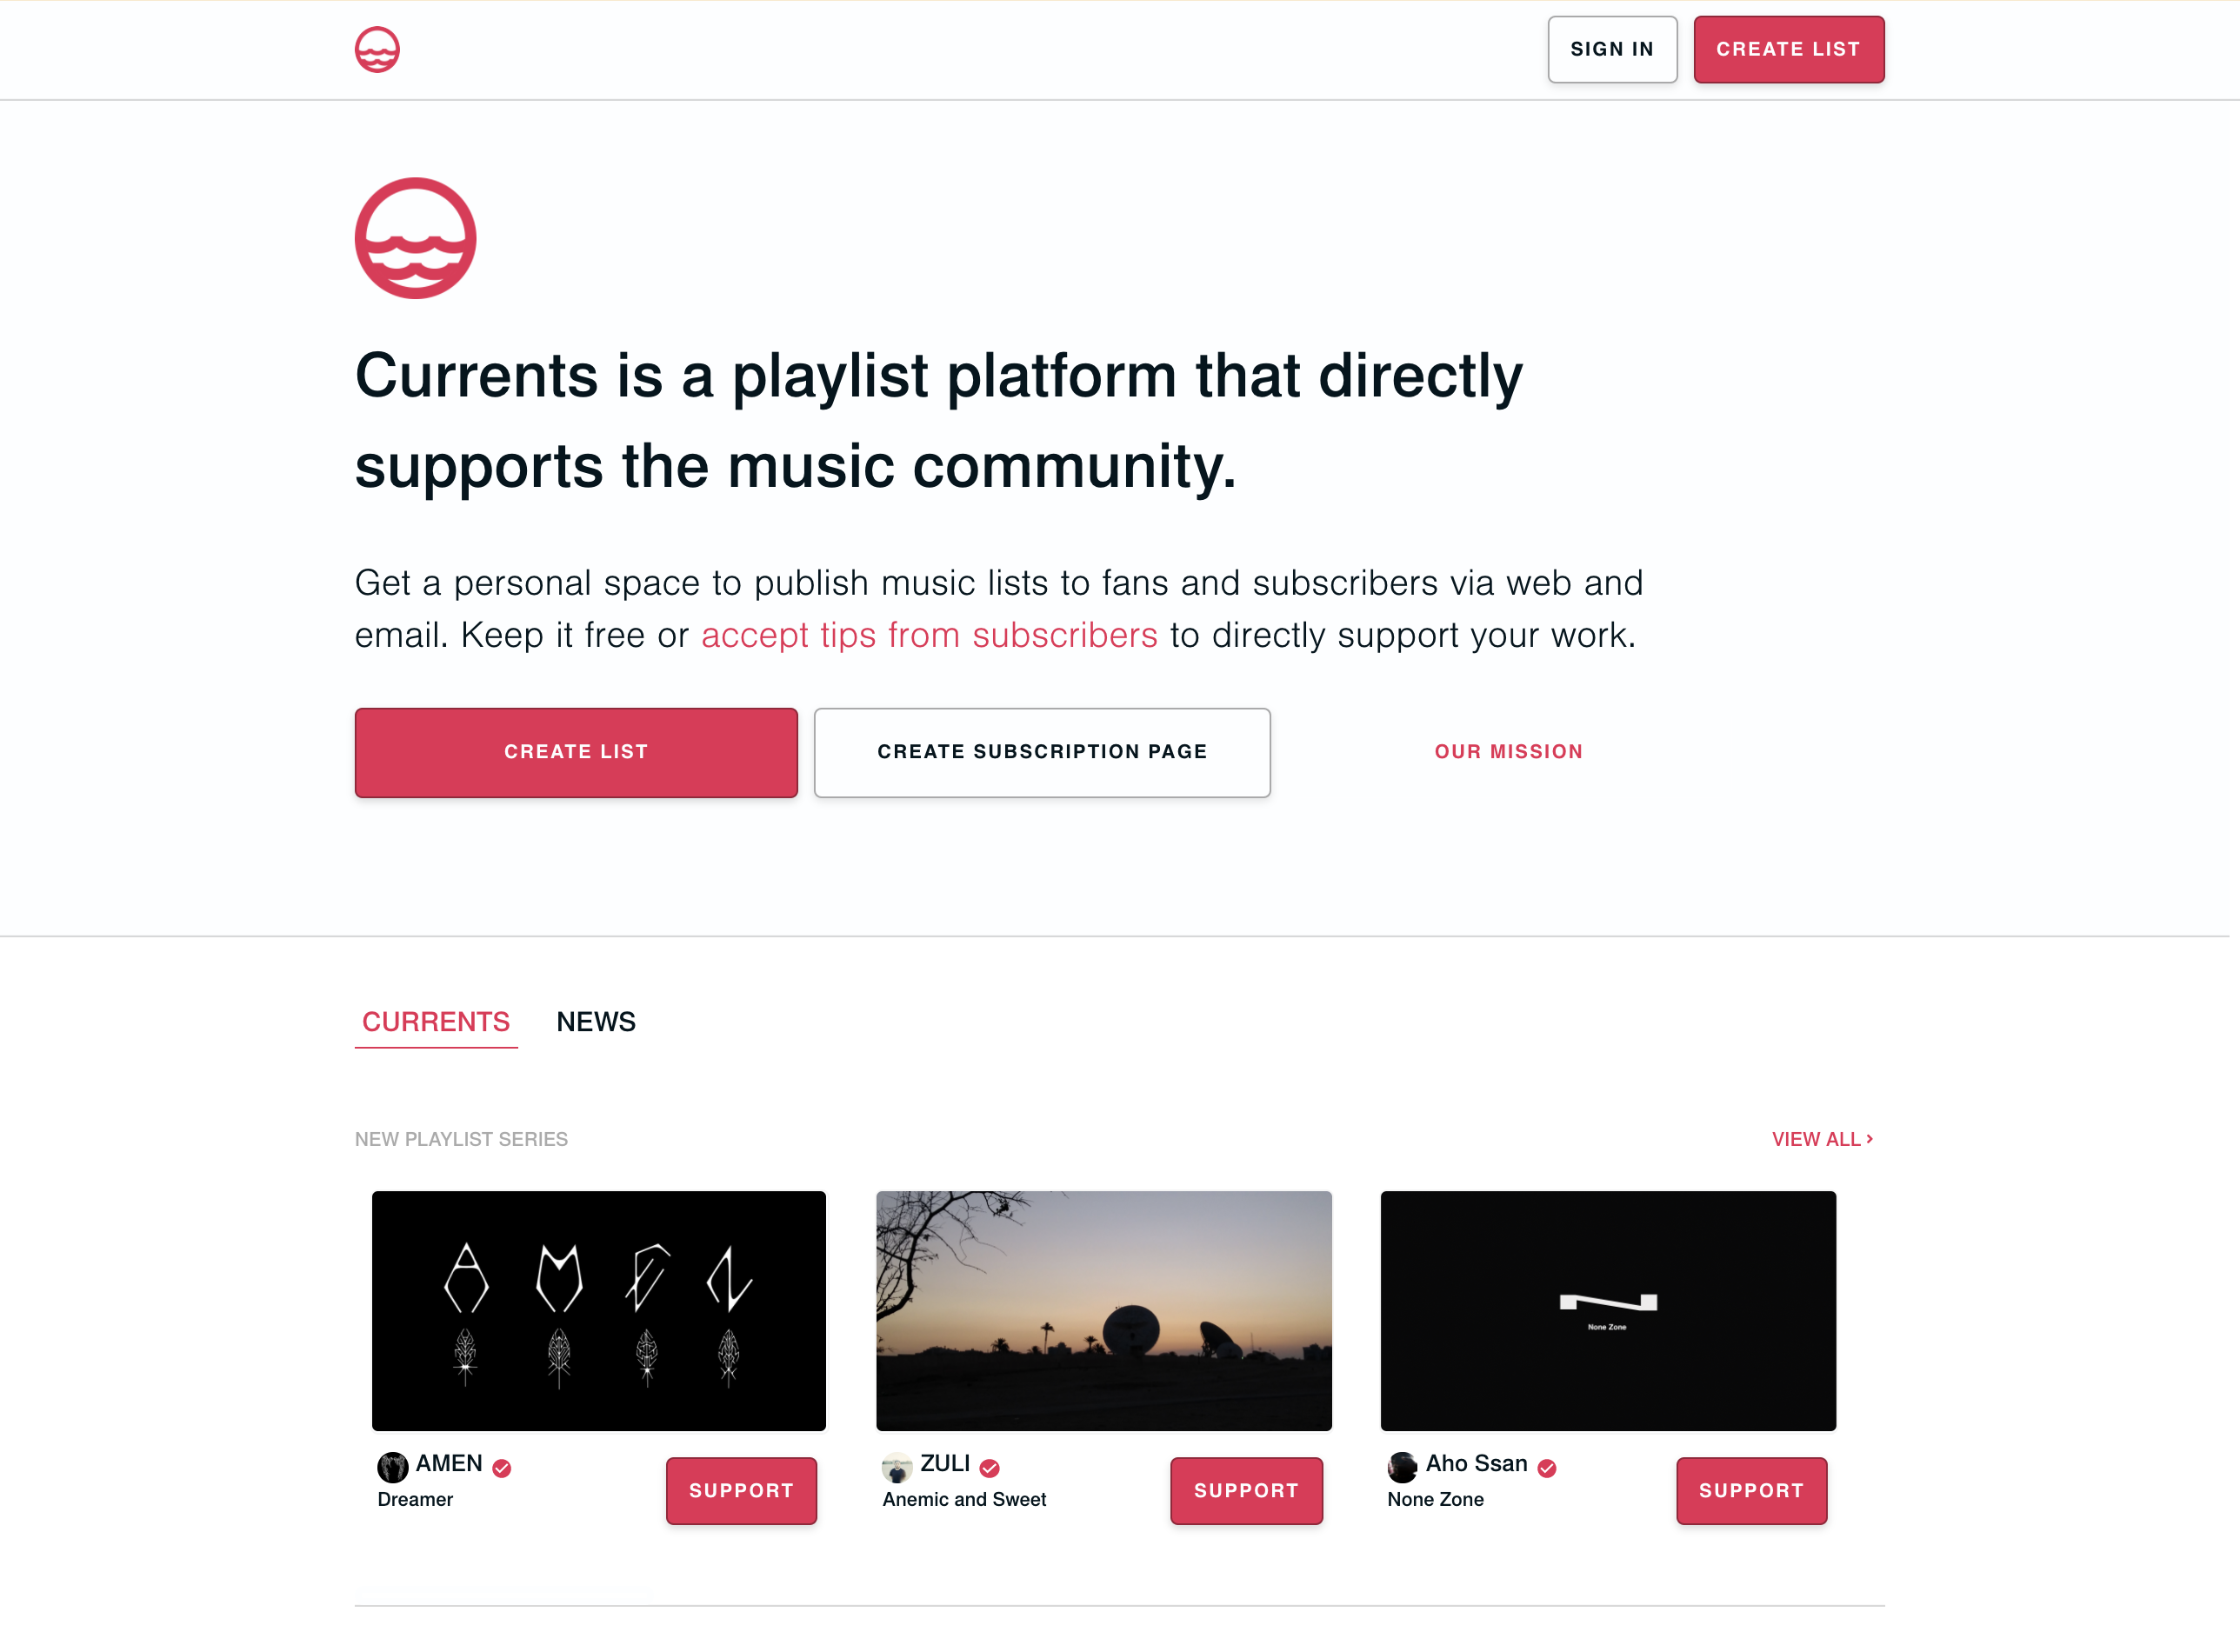 A partial screenshot from currents.fm homepage focused on the title and subtitle, which read ‘Currents is a playlist platform that directly supports the music community. Get a personal space to publish music lists to fans and subscribers via web and email. Keep it free or accept tips from subscribers to directly support your work.’